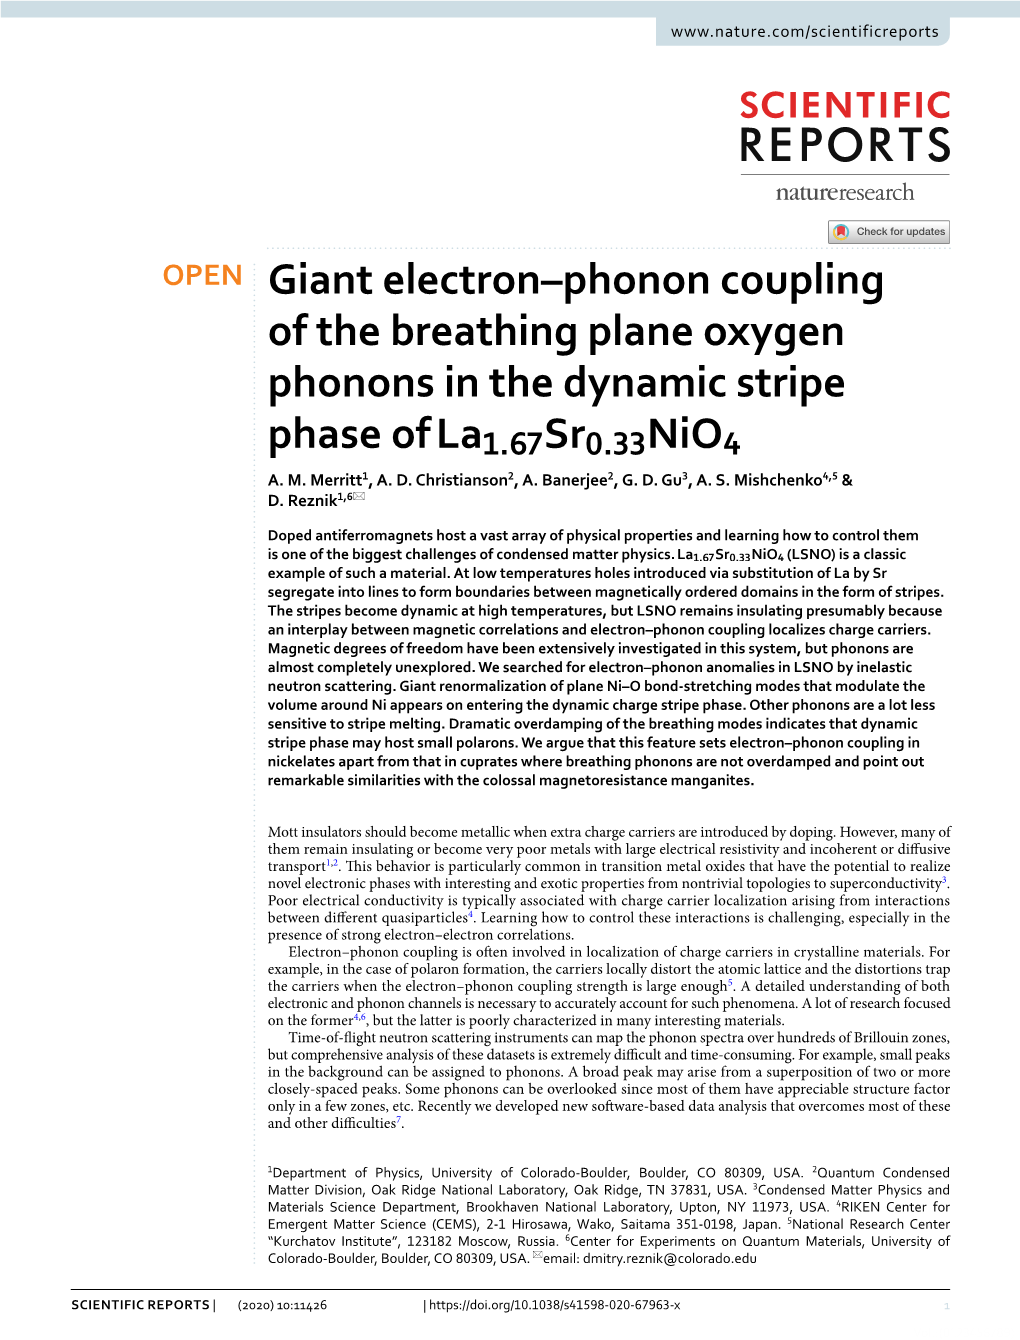 Giant Electron–Phonon Coupling of the Breathing Plane Oxygen Phonons in the Dynamic Stripe Phase of La1.67Sr0.33Nio4 A